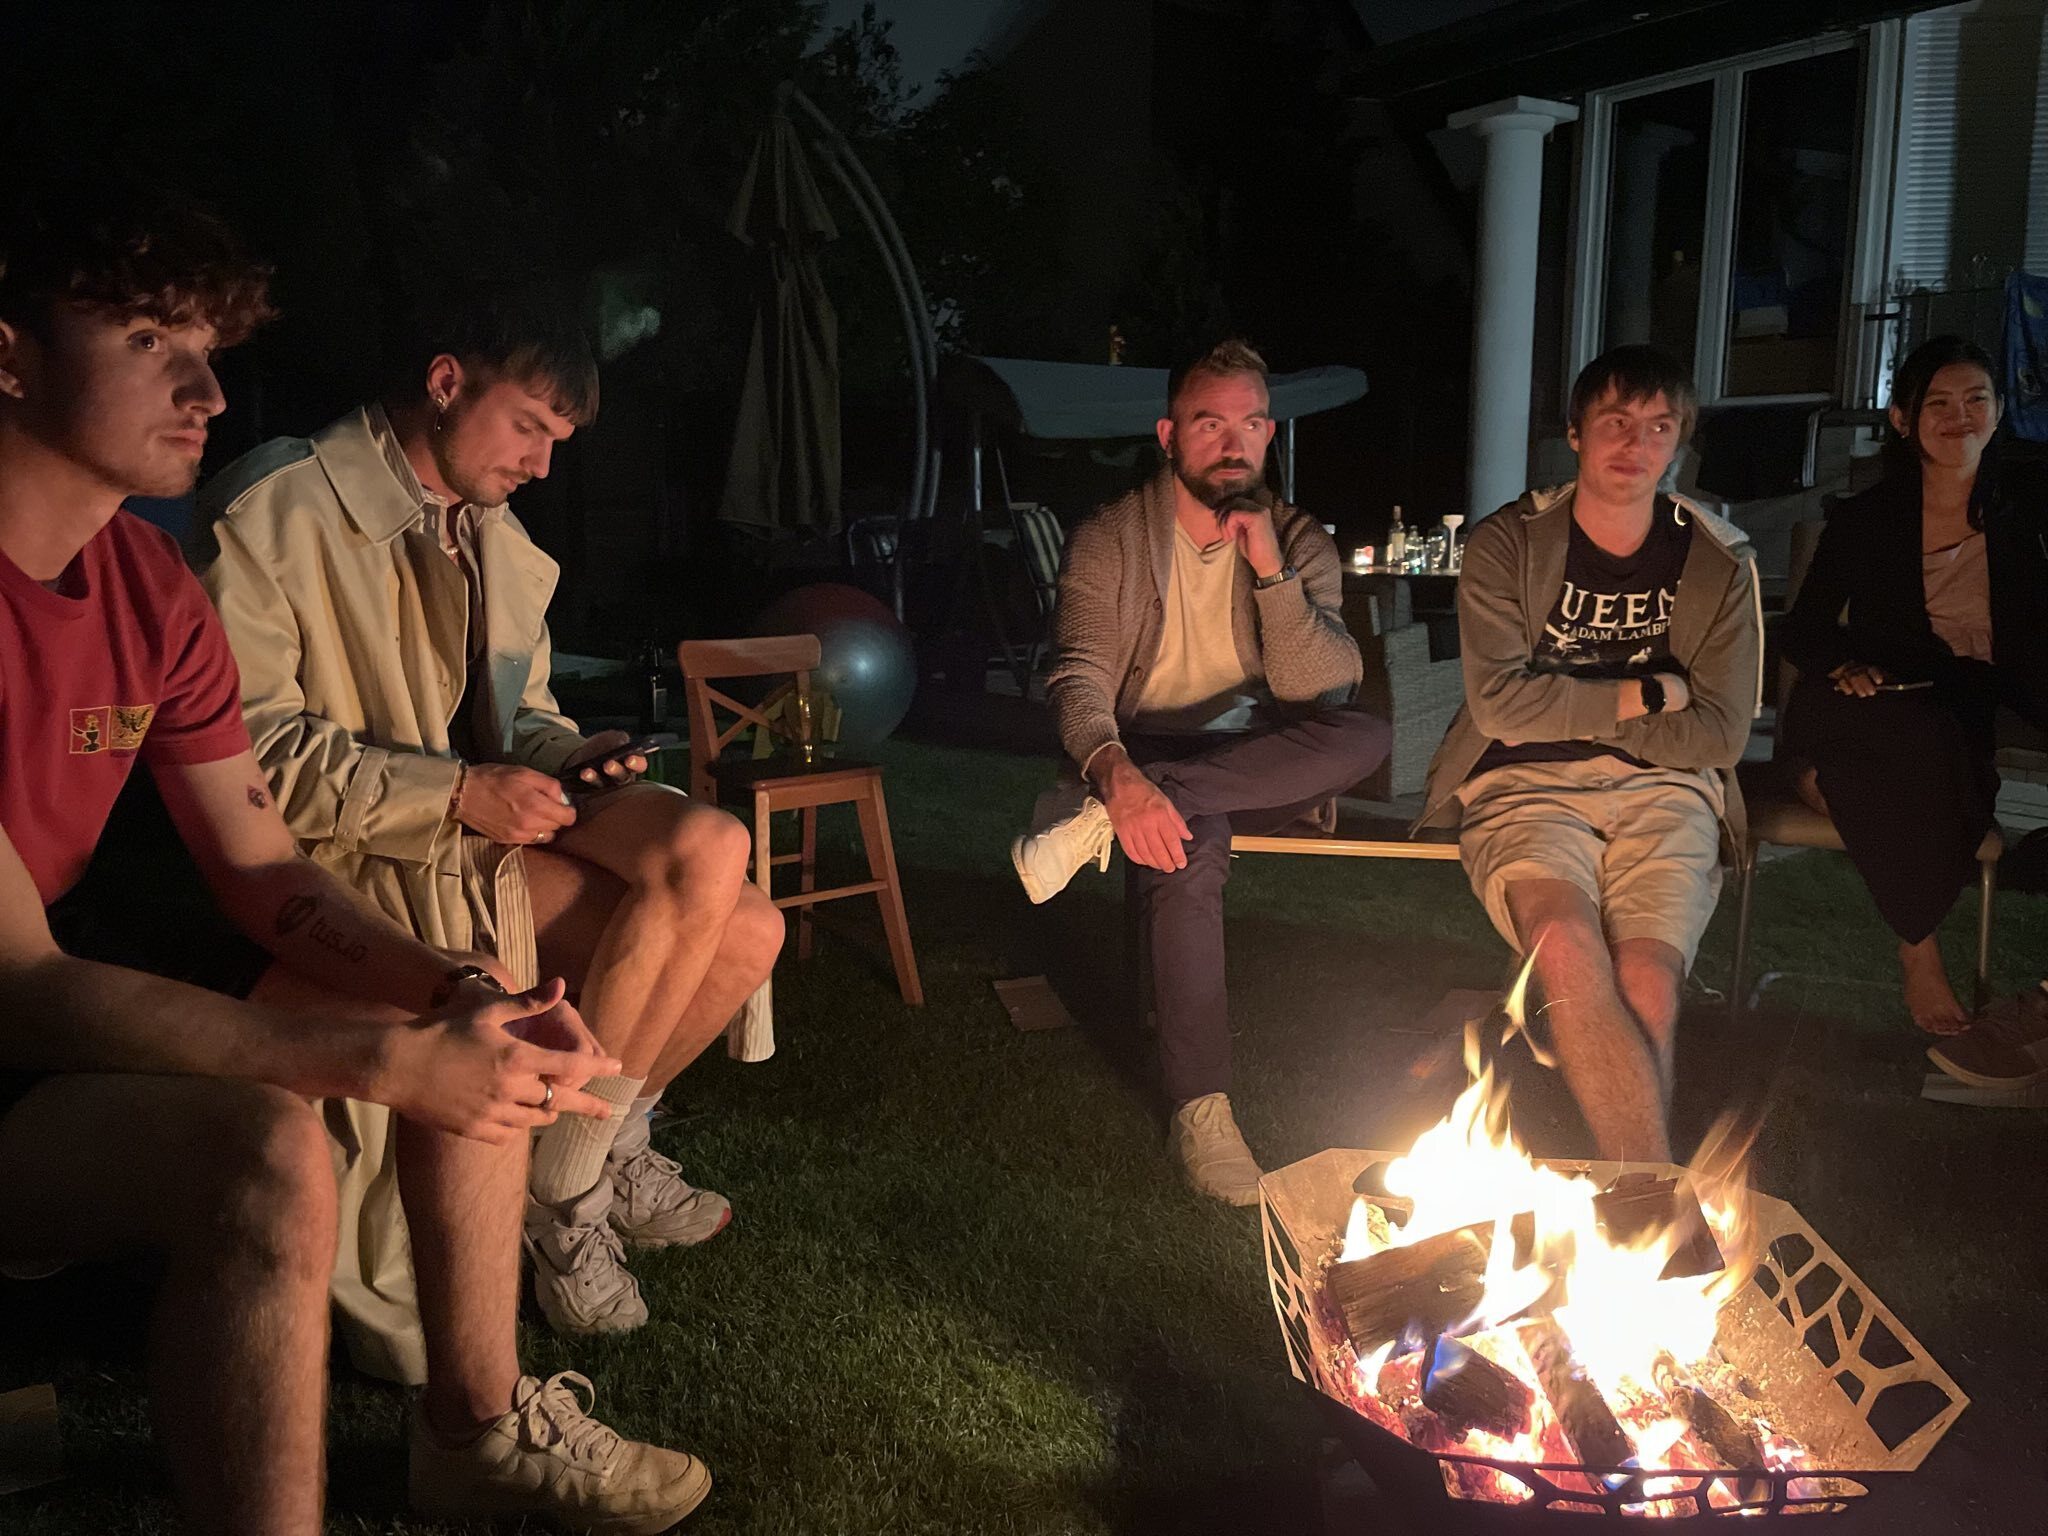 The team around the fire having some discussions about the future of Transloadit.